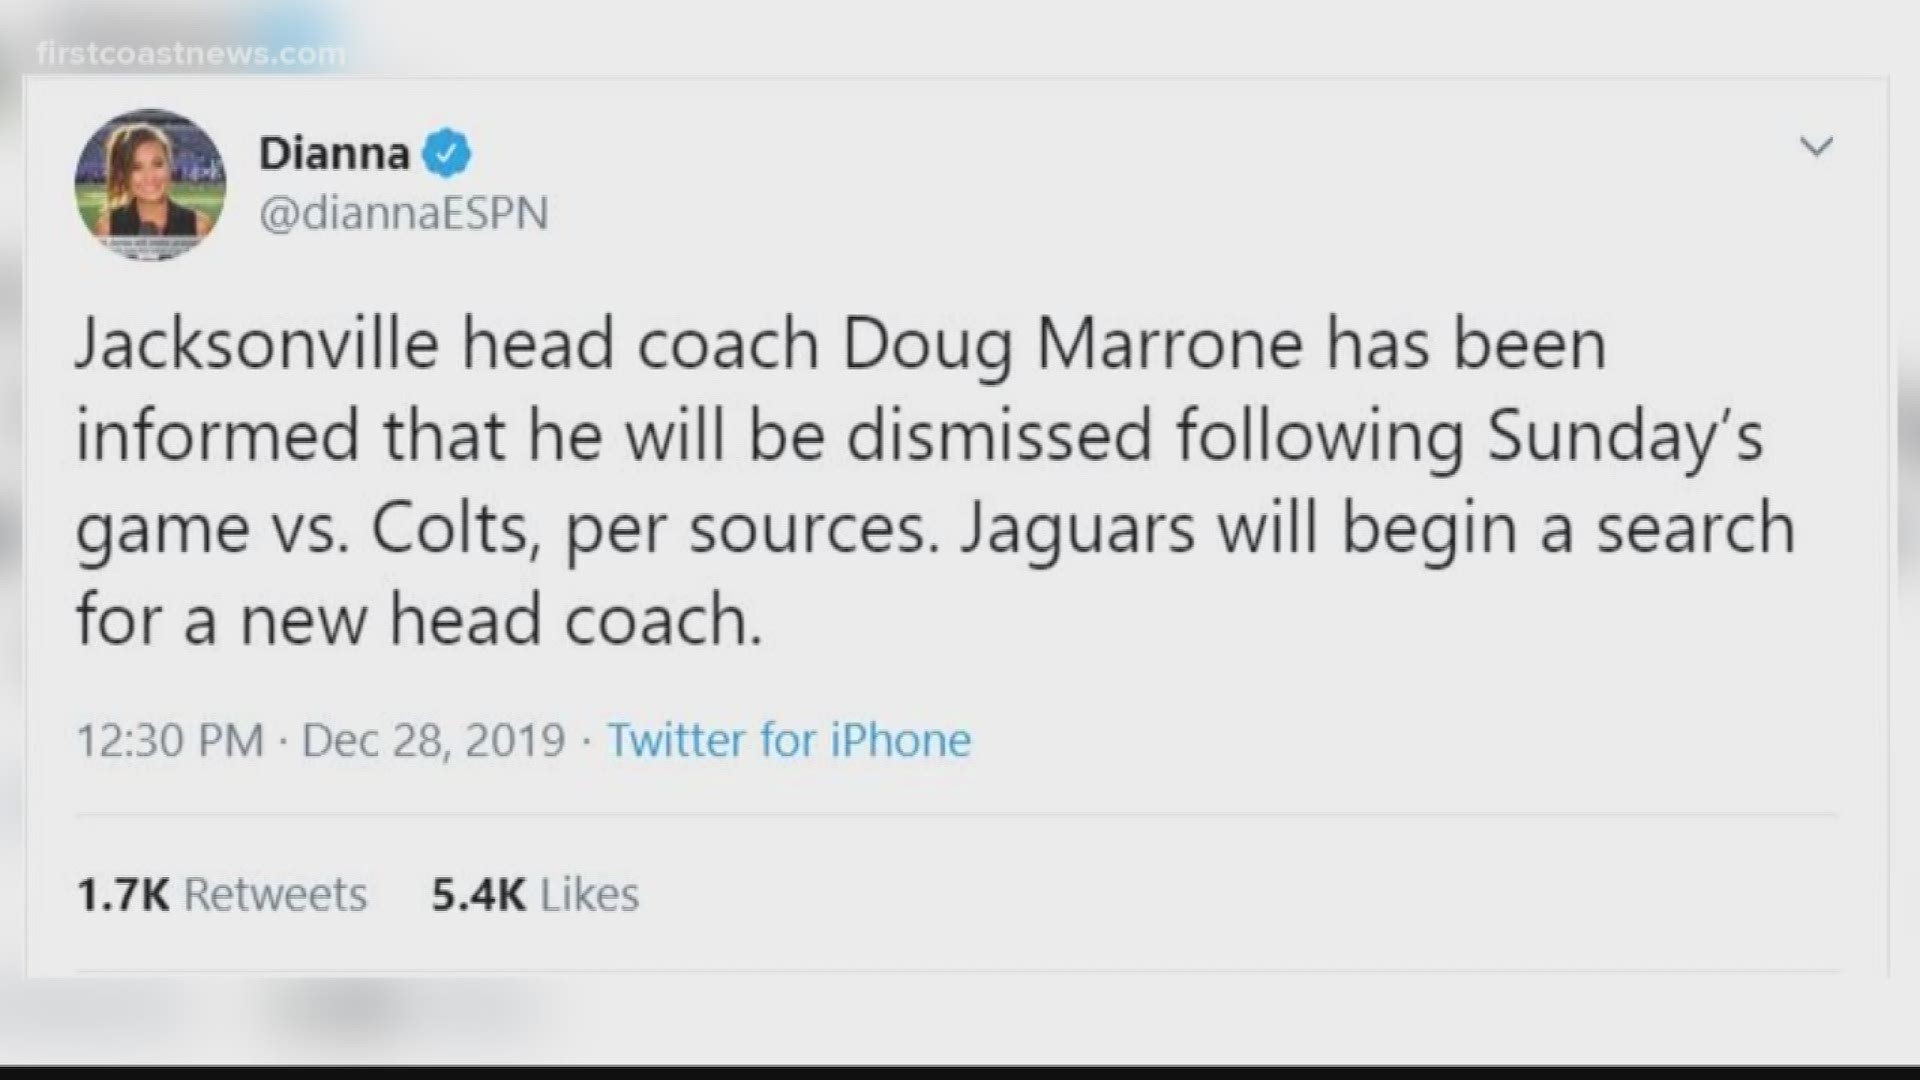 ESPN’s Dianna Russini tweeted Saturday that Jaguars head Coach Doug Marrone has been informed that he will be dismissed following Sunday’s game against the Colts.